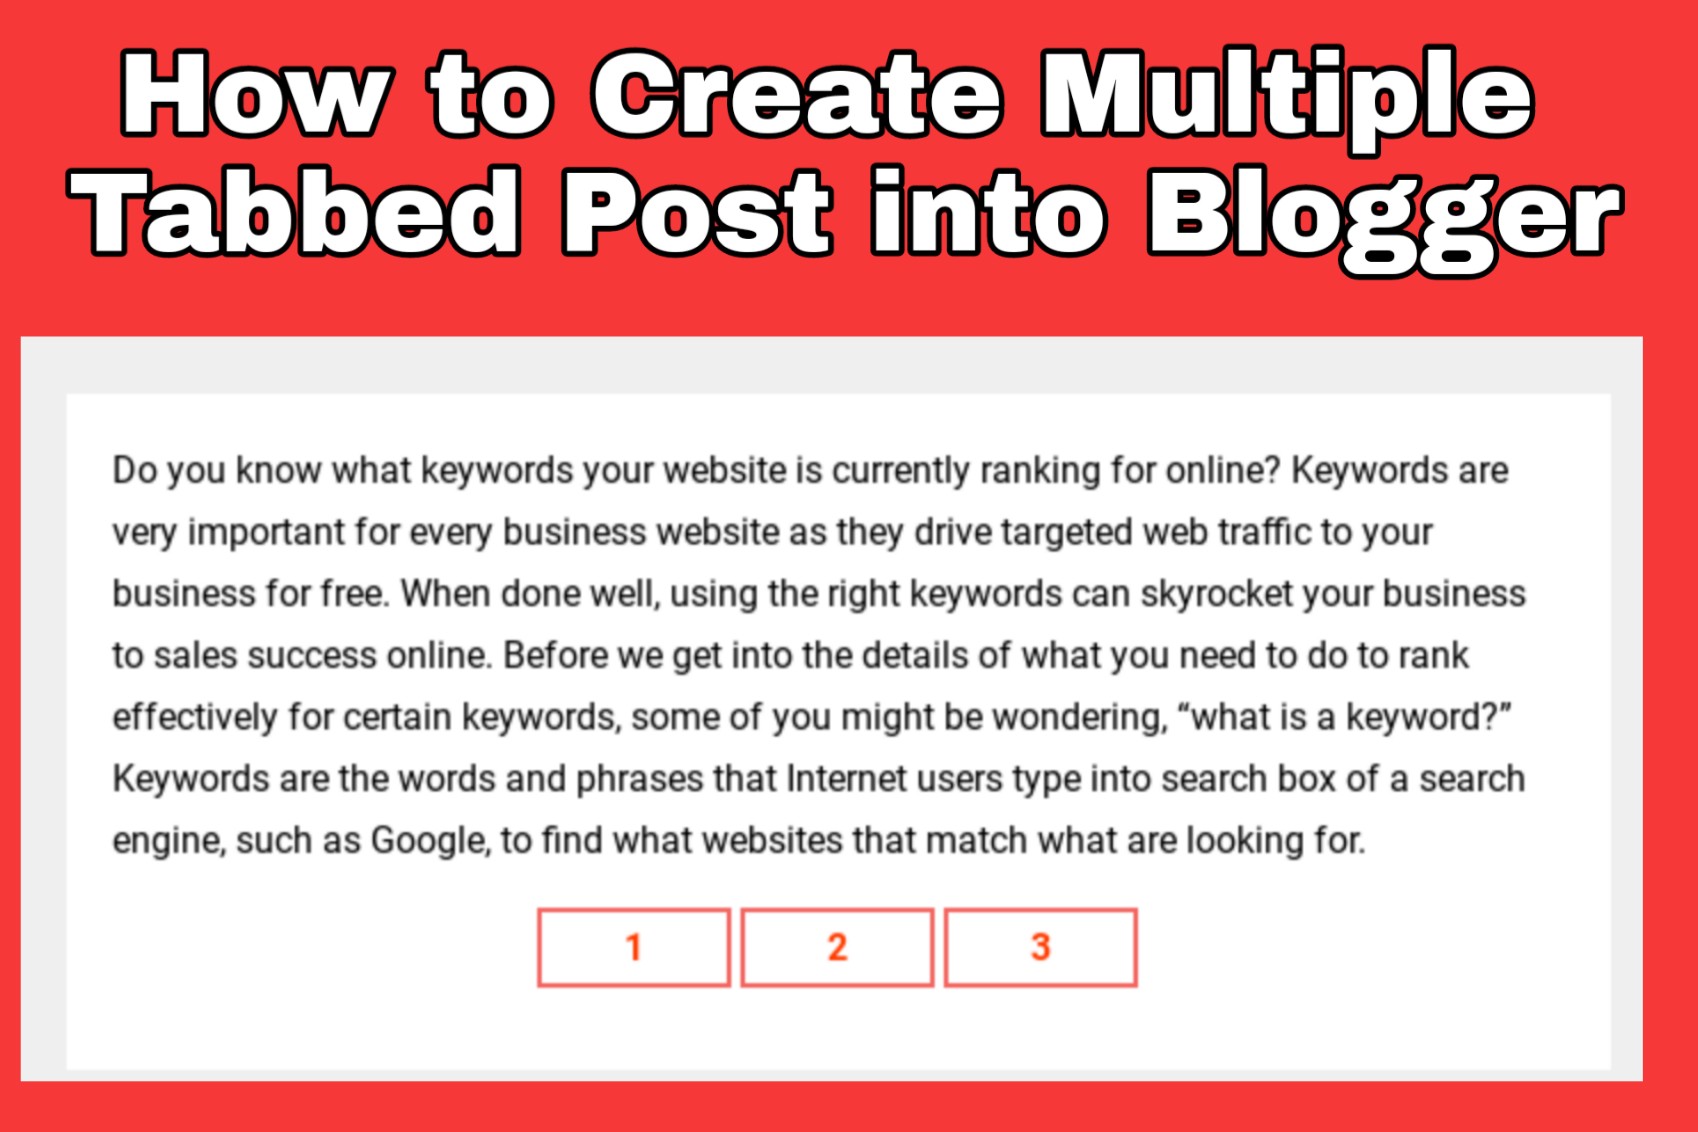 How to Create Multiple Tabbed Post into Blogger